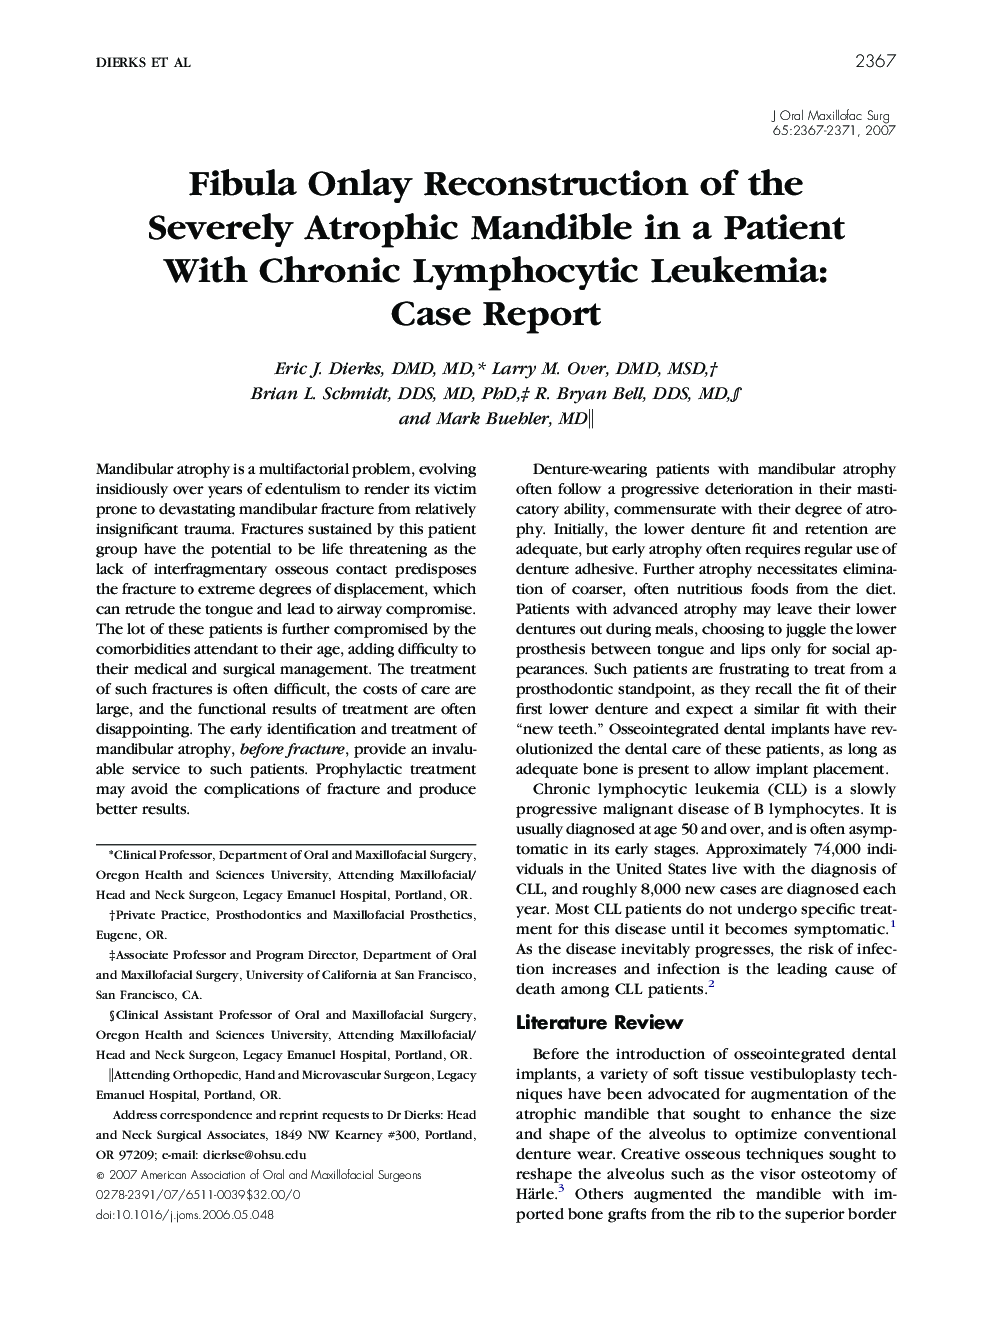 Fibula Onlay Reconstruction of the Severely Atrophic Mandible in a Patient With Chronic Lymphocytic Leukemia: Case Report